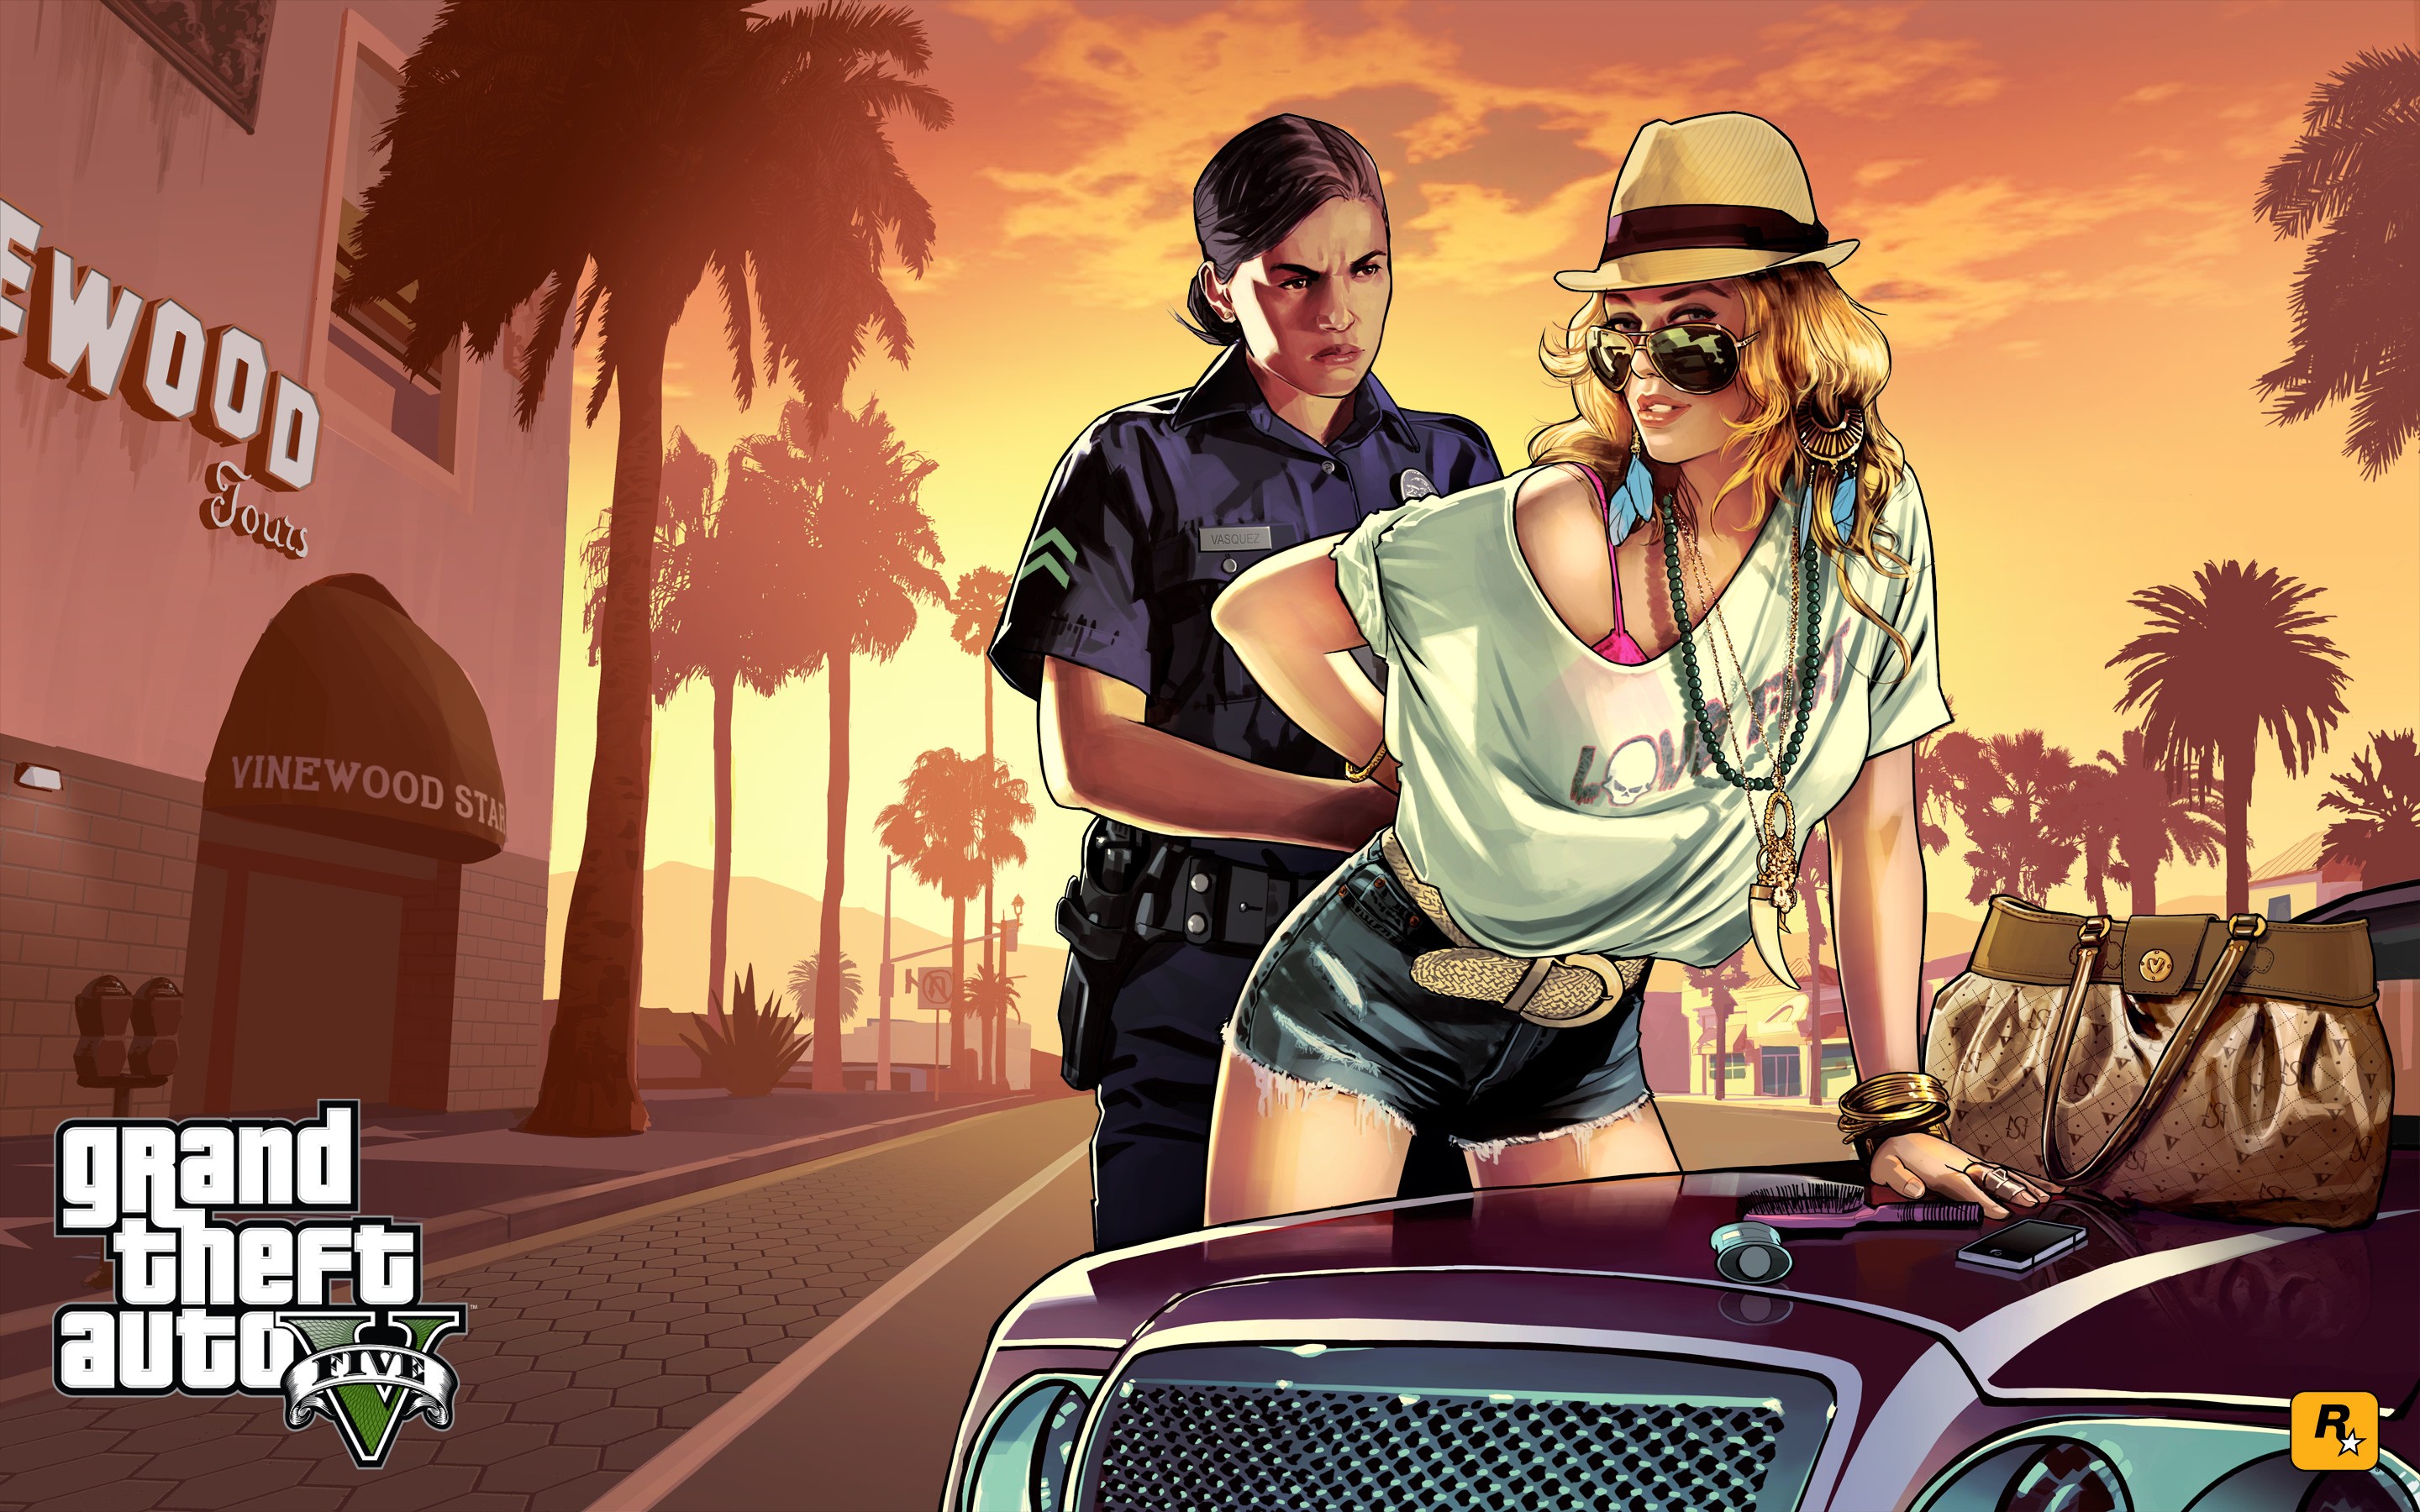 General 2880x1800 Grand Theft Auto V Grand Theft Auto video games video game girls video game art PC gaming Rockstar Games police women